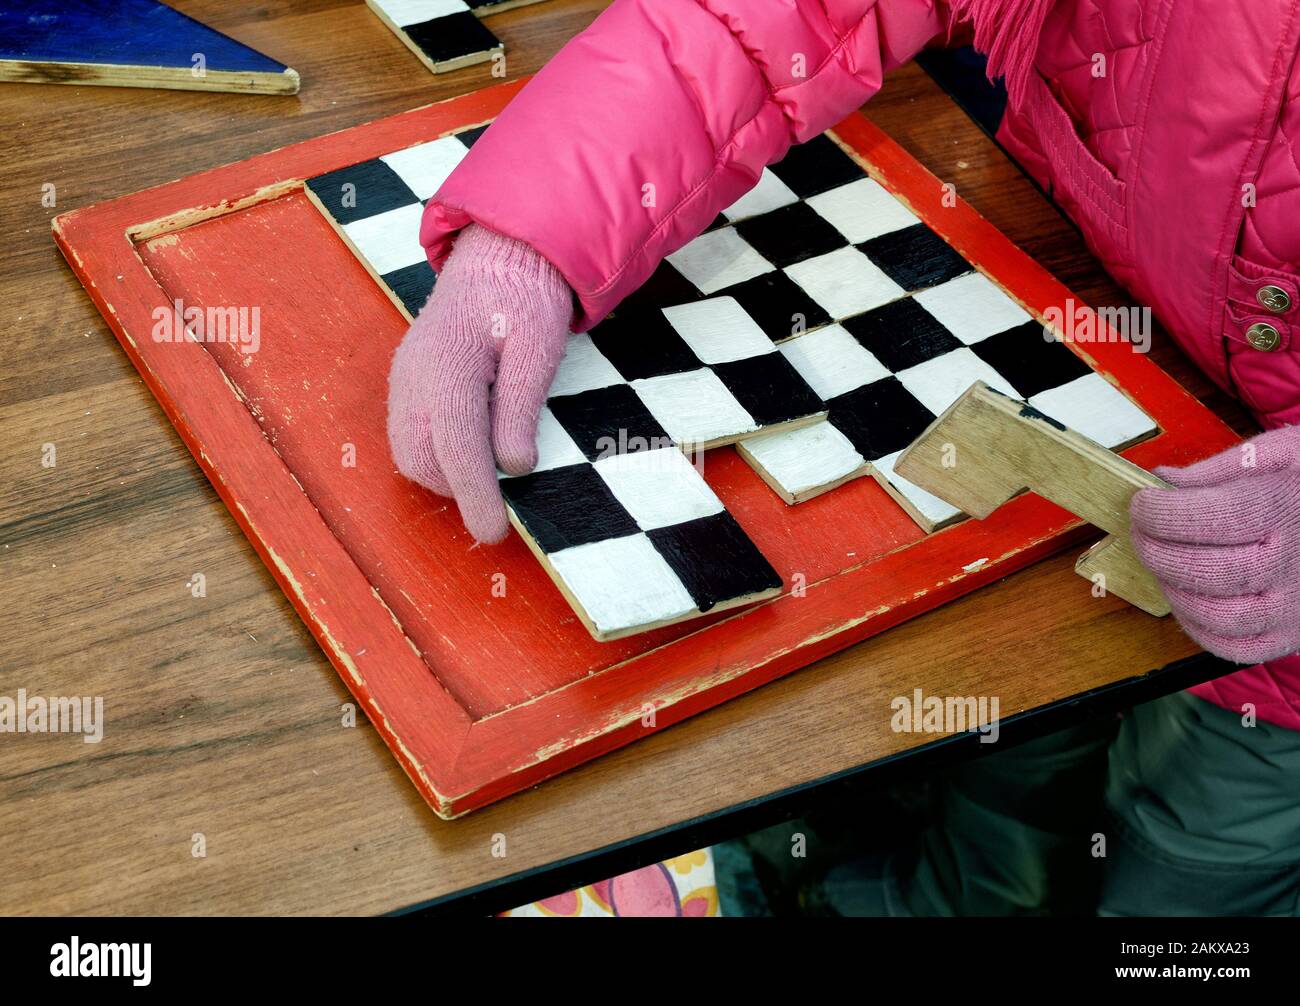 The child on the table collects wooden golovolomka. Stock Photo